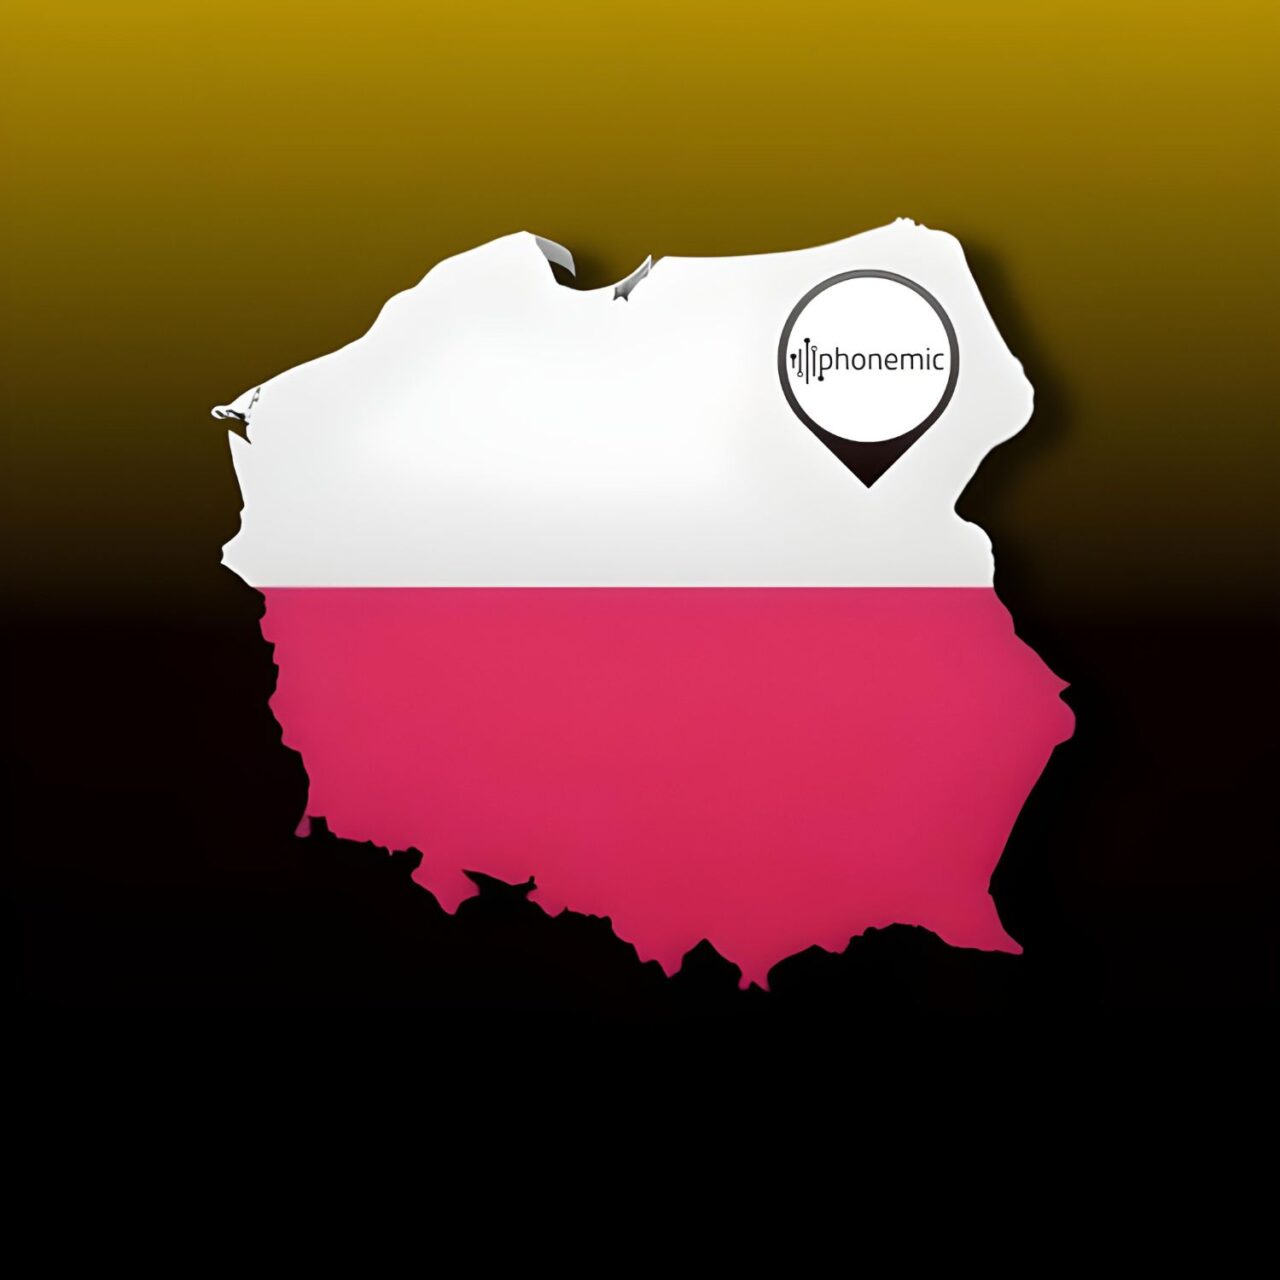 a map of Poland on a yellow & black background with a Phonemic logo presenting company's geo location